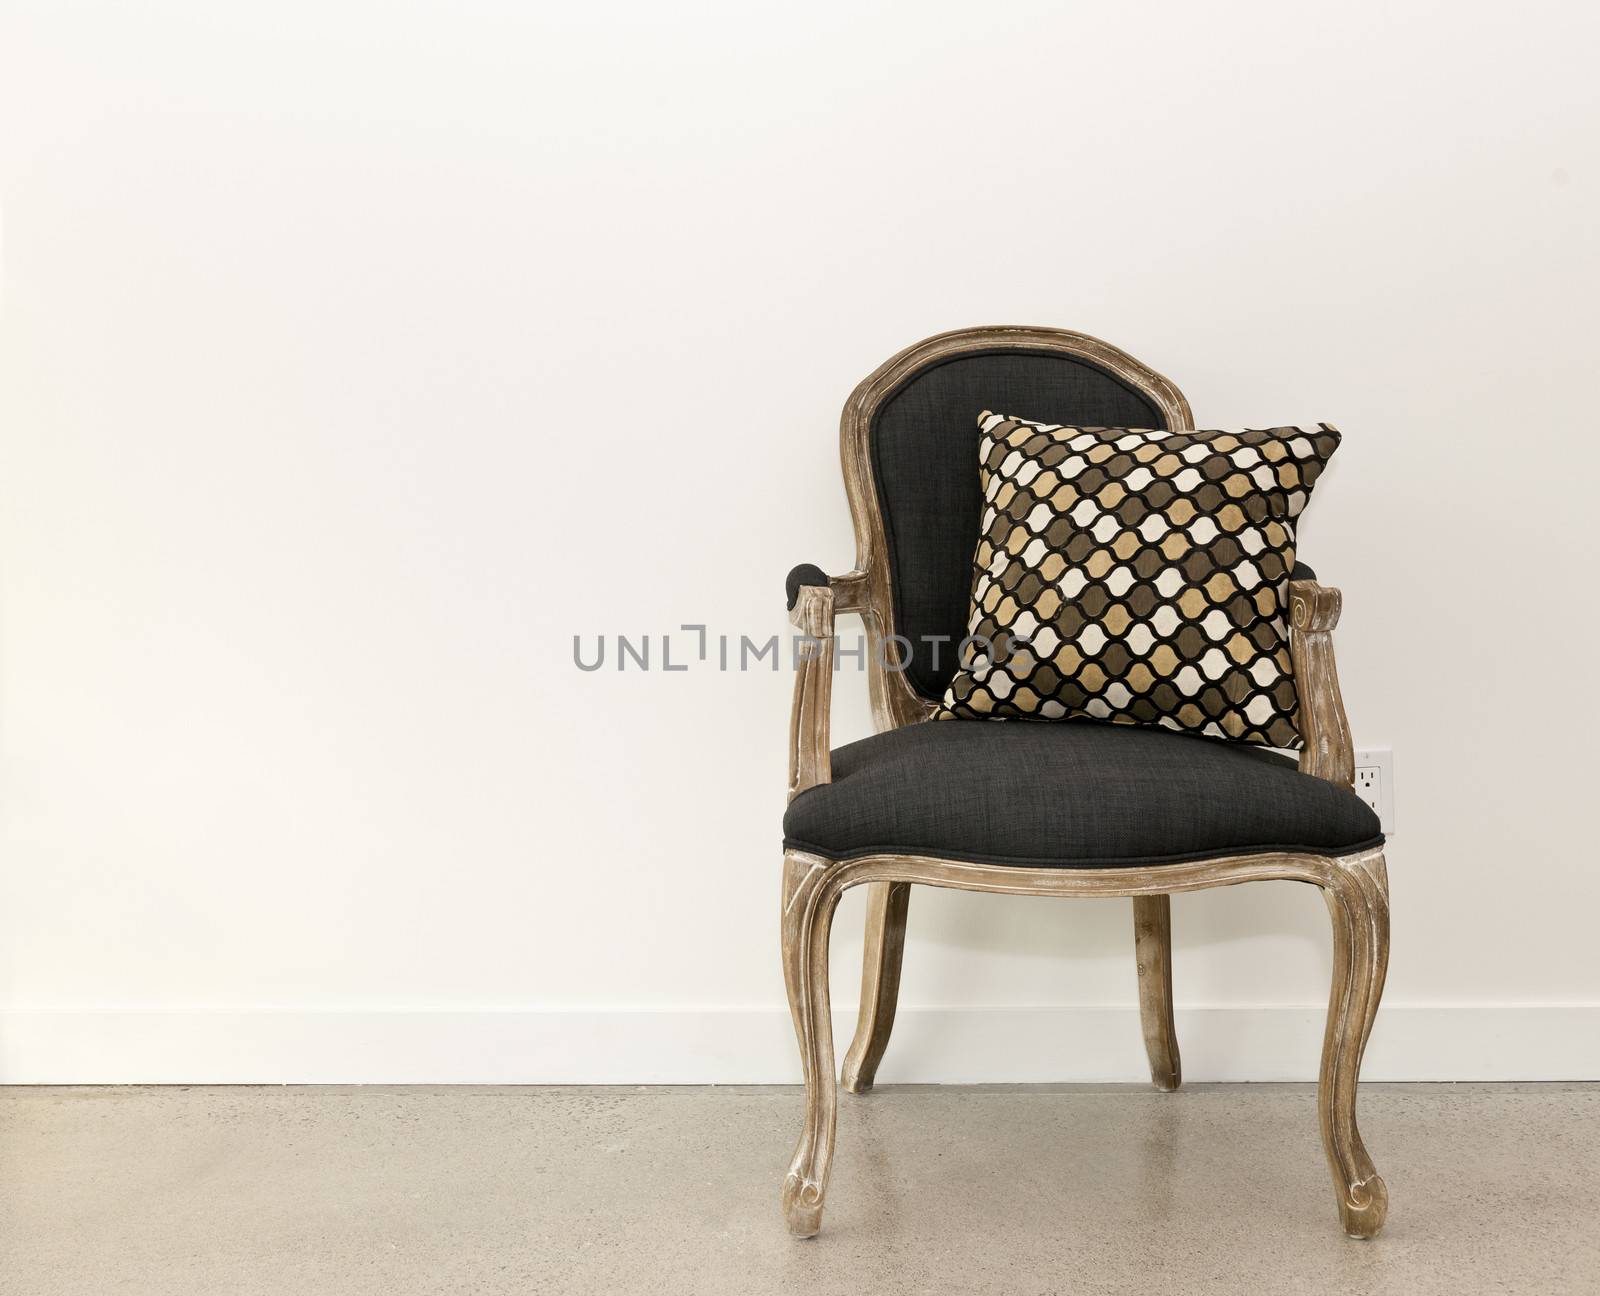 Antique armchair furniture with cushion against white wall